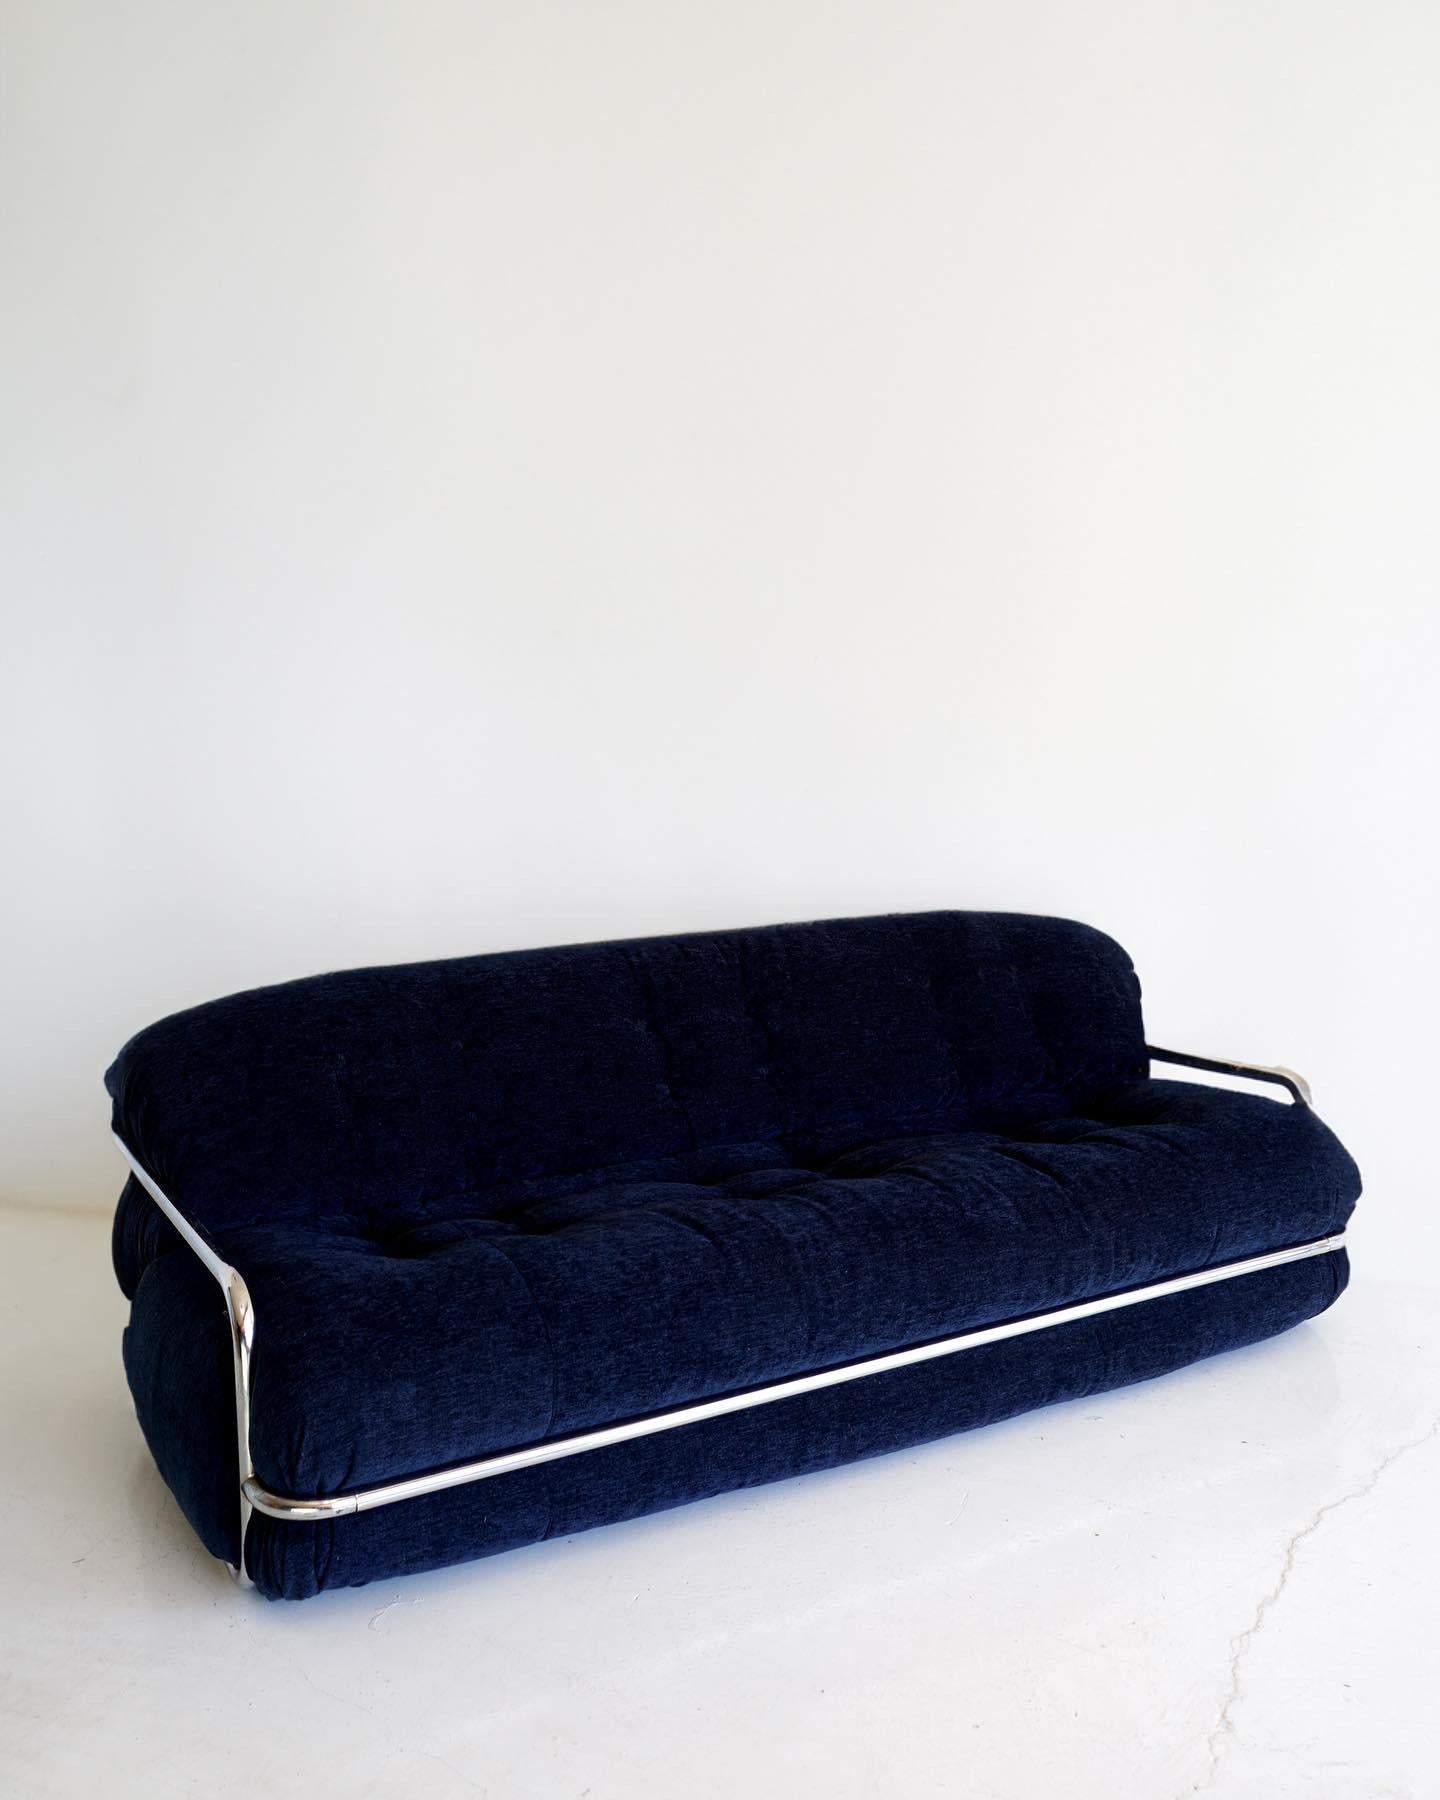 Low, curvy, and endlessly seductive 3-seat sofa by Mario Sabot. Stunning from all angles, this rarely seen model has been newly reupholstered in a beautiful deep blue woven velvet and is in excellent condition. Reduced shipping costs available for